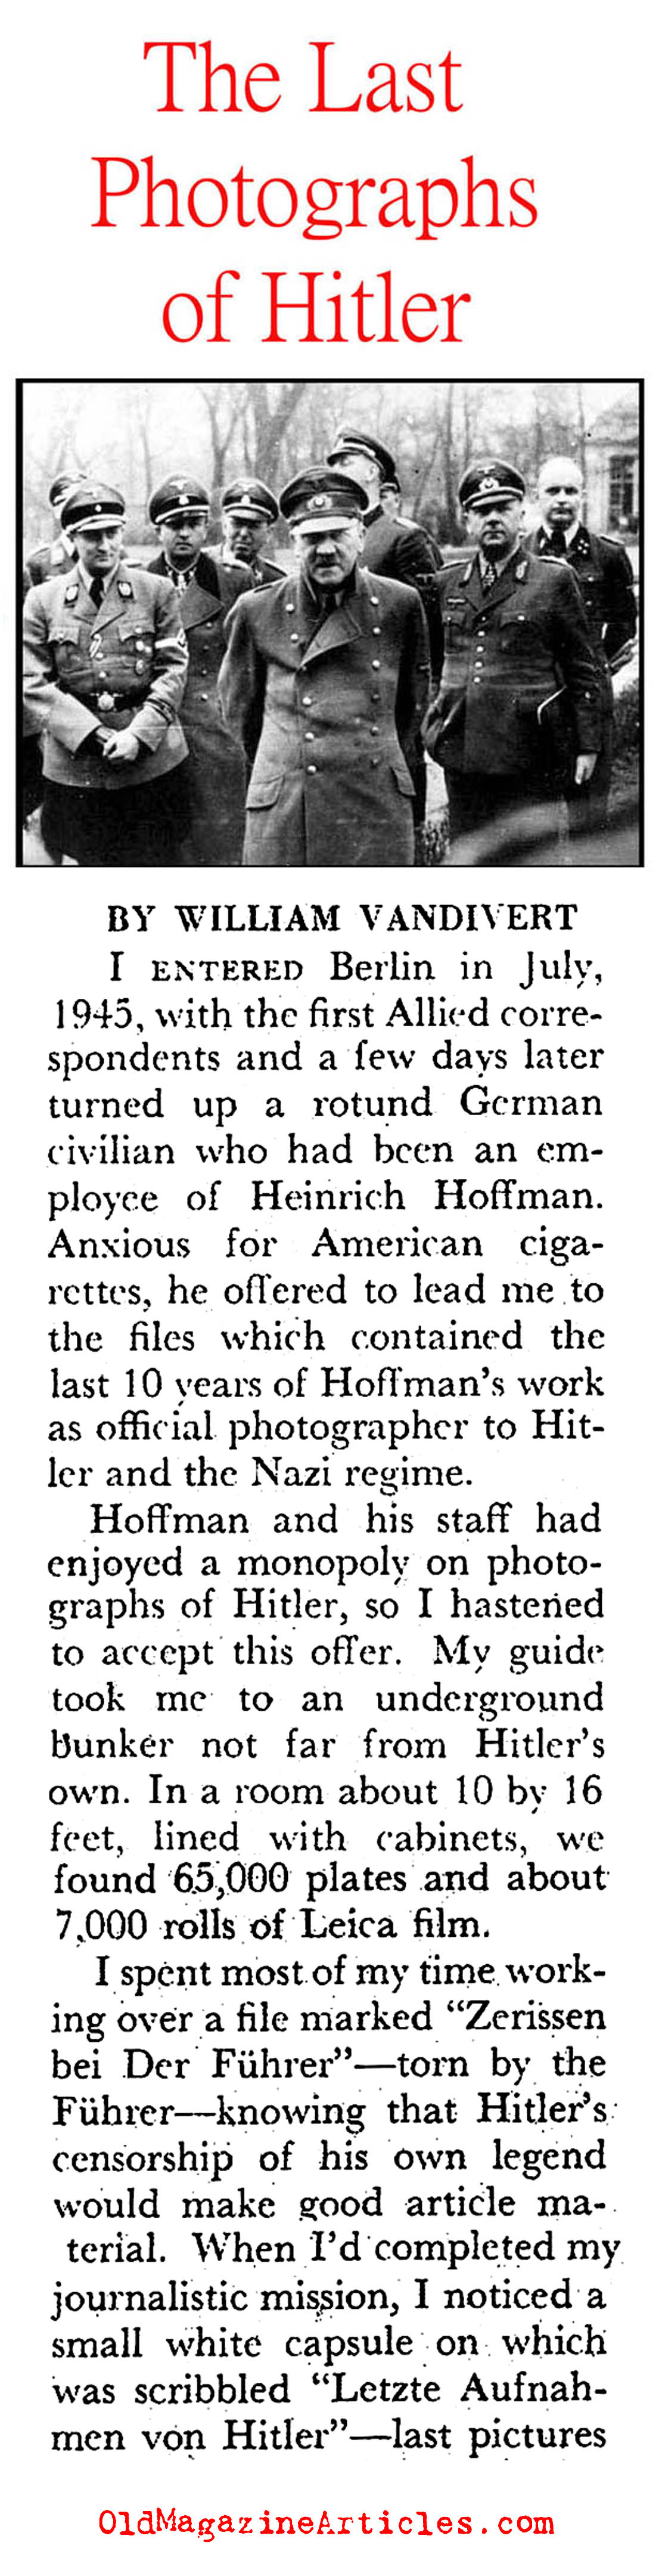 The Last Photographs of Hitler (Pageant Magazine, 1952)